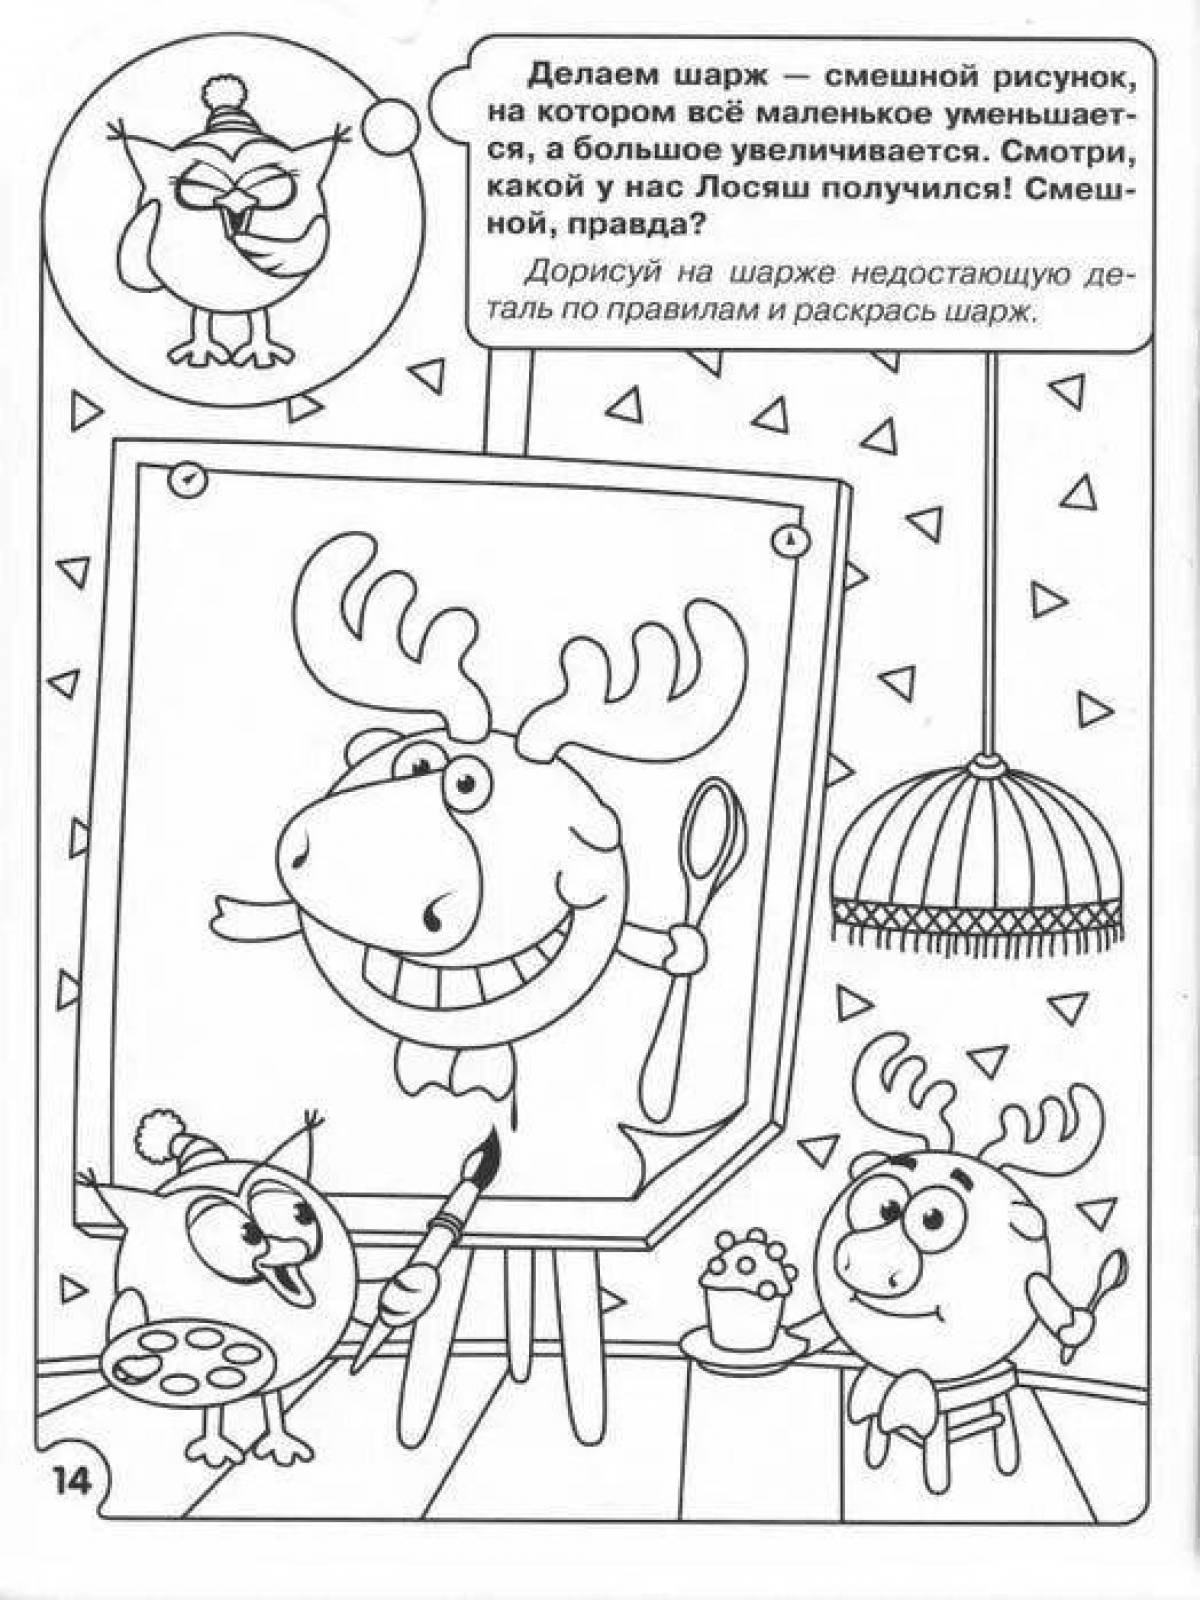 Cute smart smeshariki coloring pages